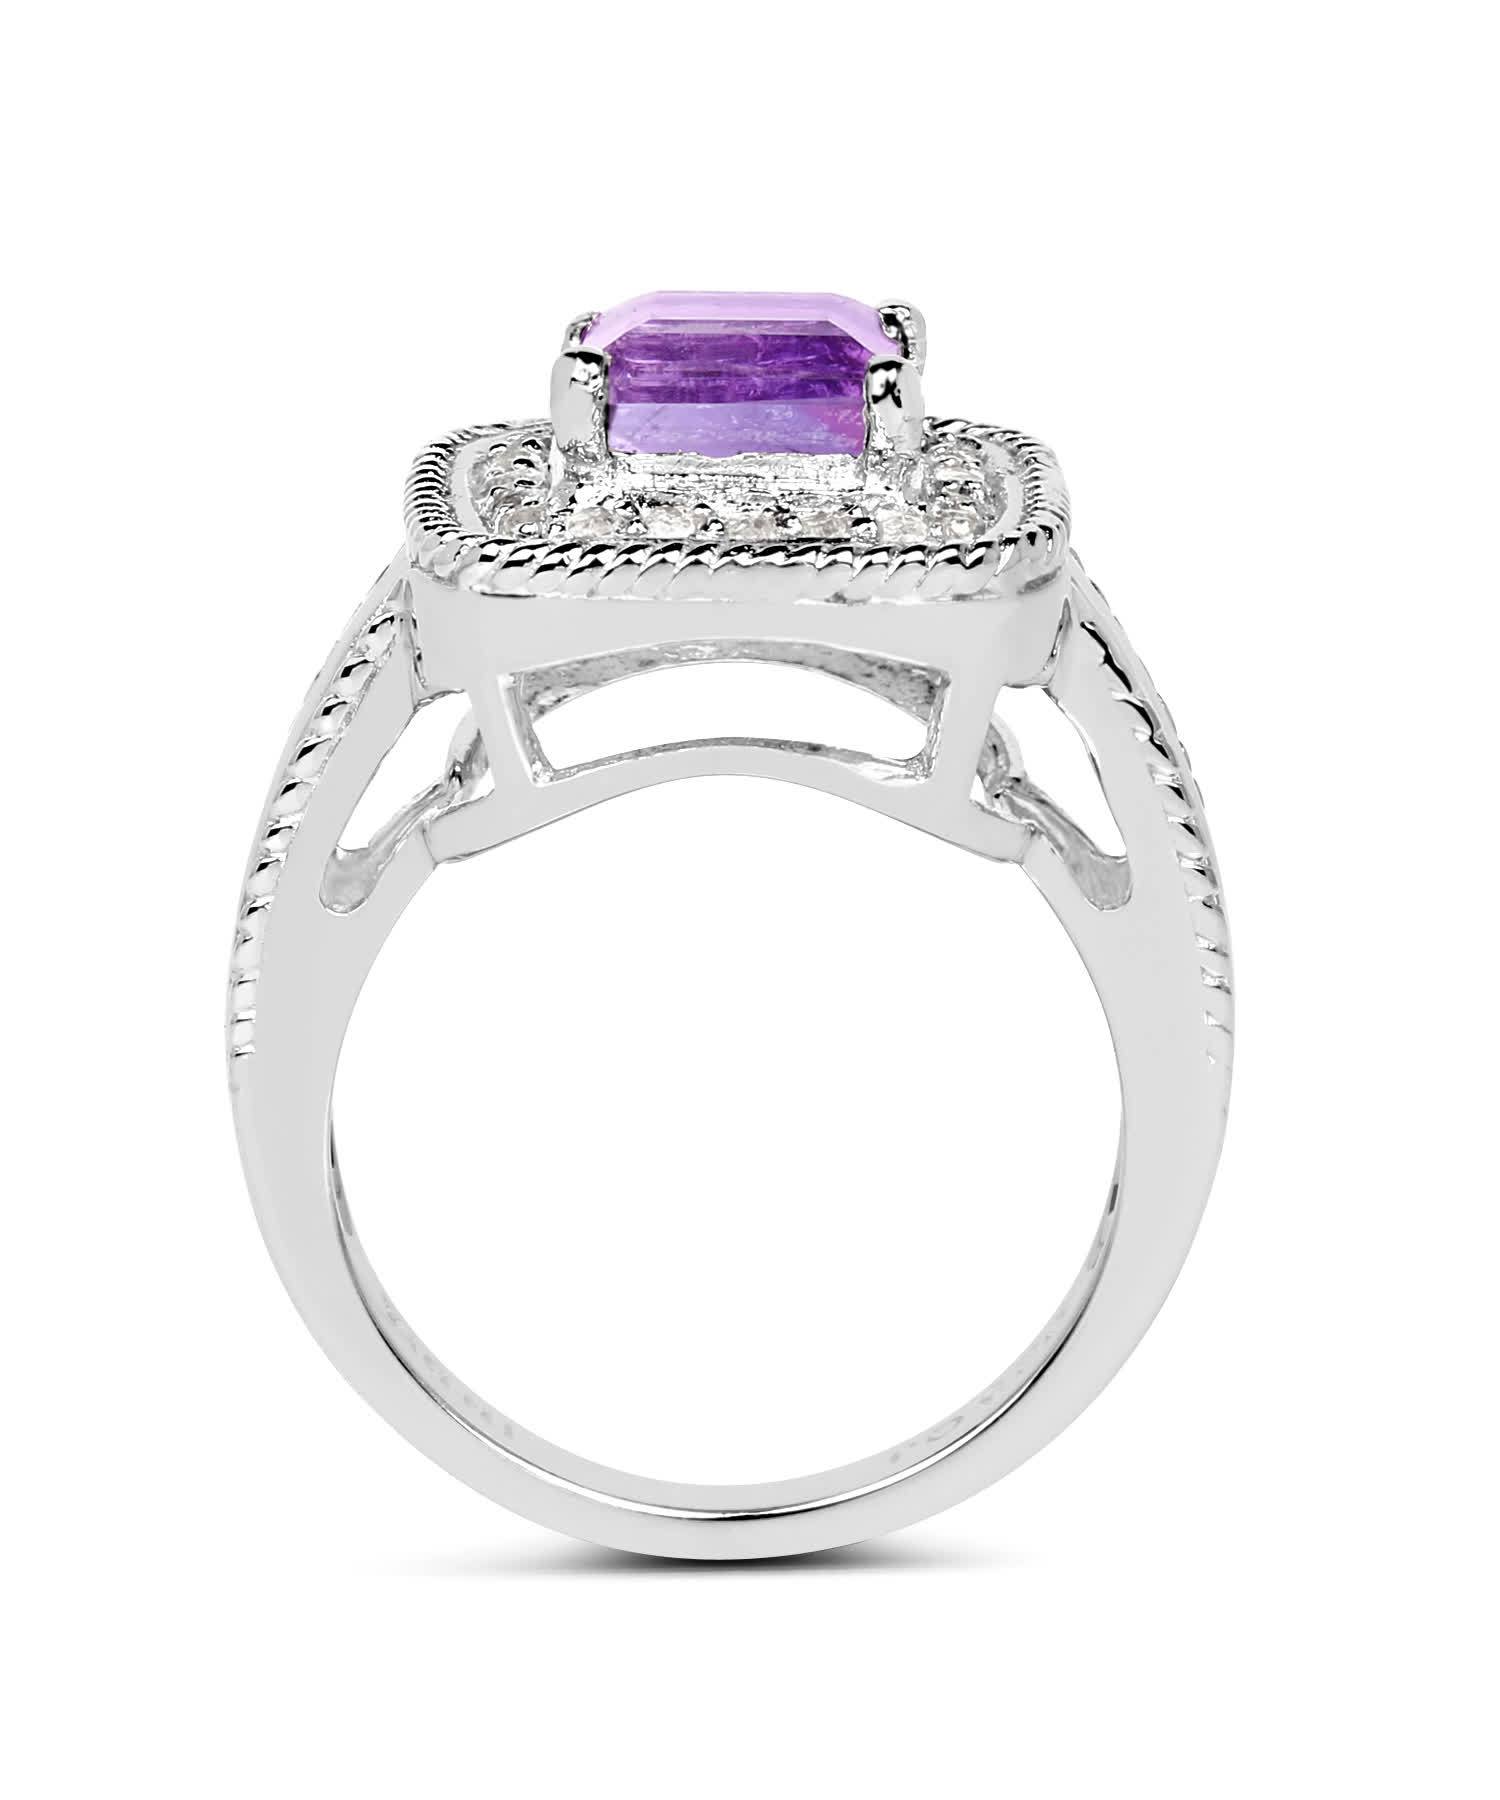 1.80ctw Natural Amethyst and Topaz Rhodium Plated 925 Sterling Silver Fashion Ring View 2